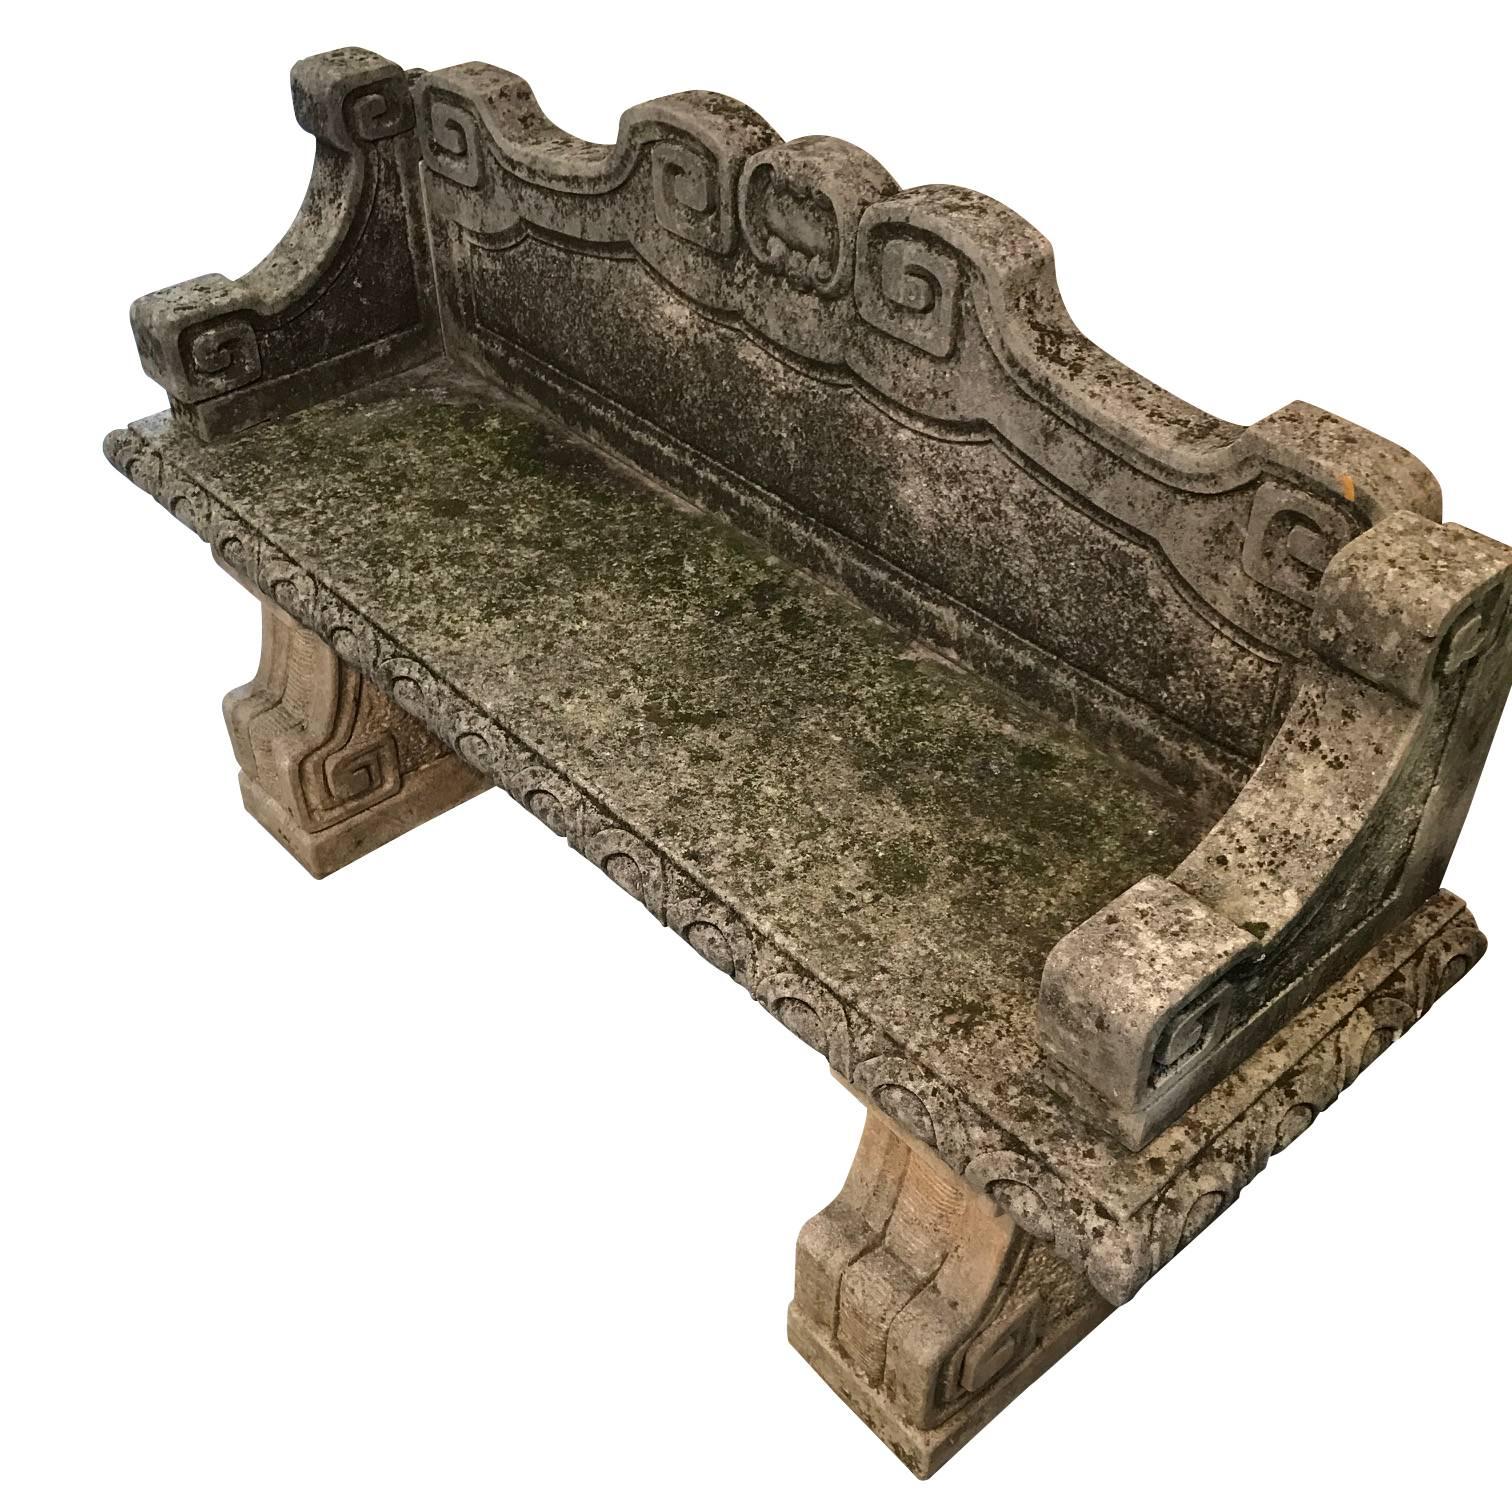 1920s Italian hand-carved Vicenza stone bench with classic design details.
Traditional decorative details along back and sides.
Moss and spores embedded in stone give naturally aged patina.
Originally from a large garden in a villa outside of